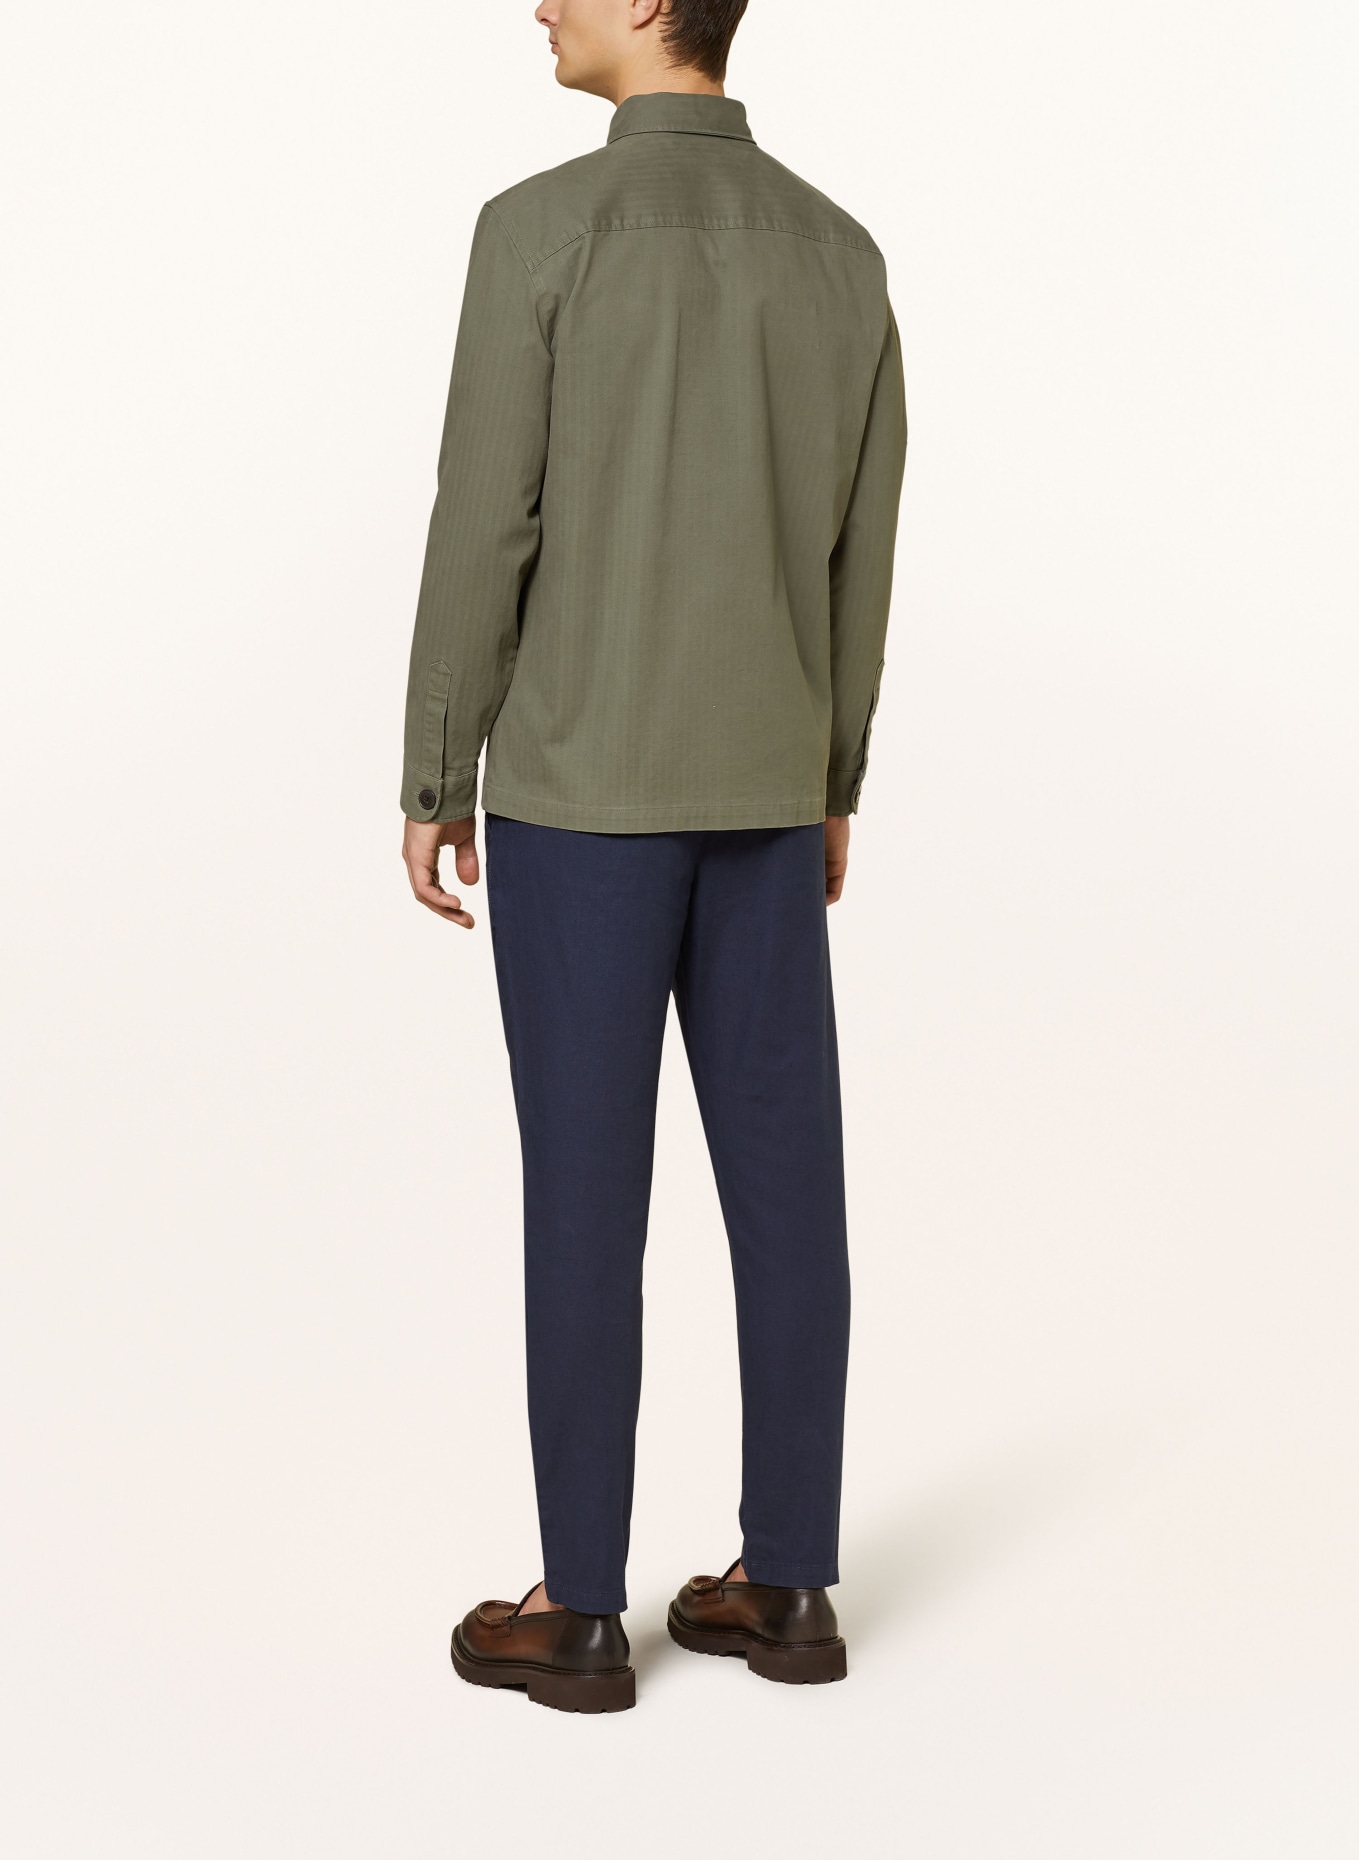 STROKESMAN'S Overshirt, Color: OLIVE (Image 3)